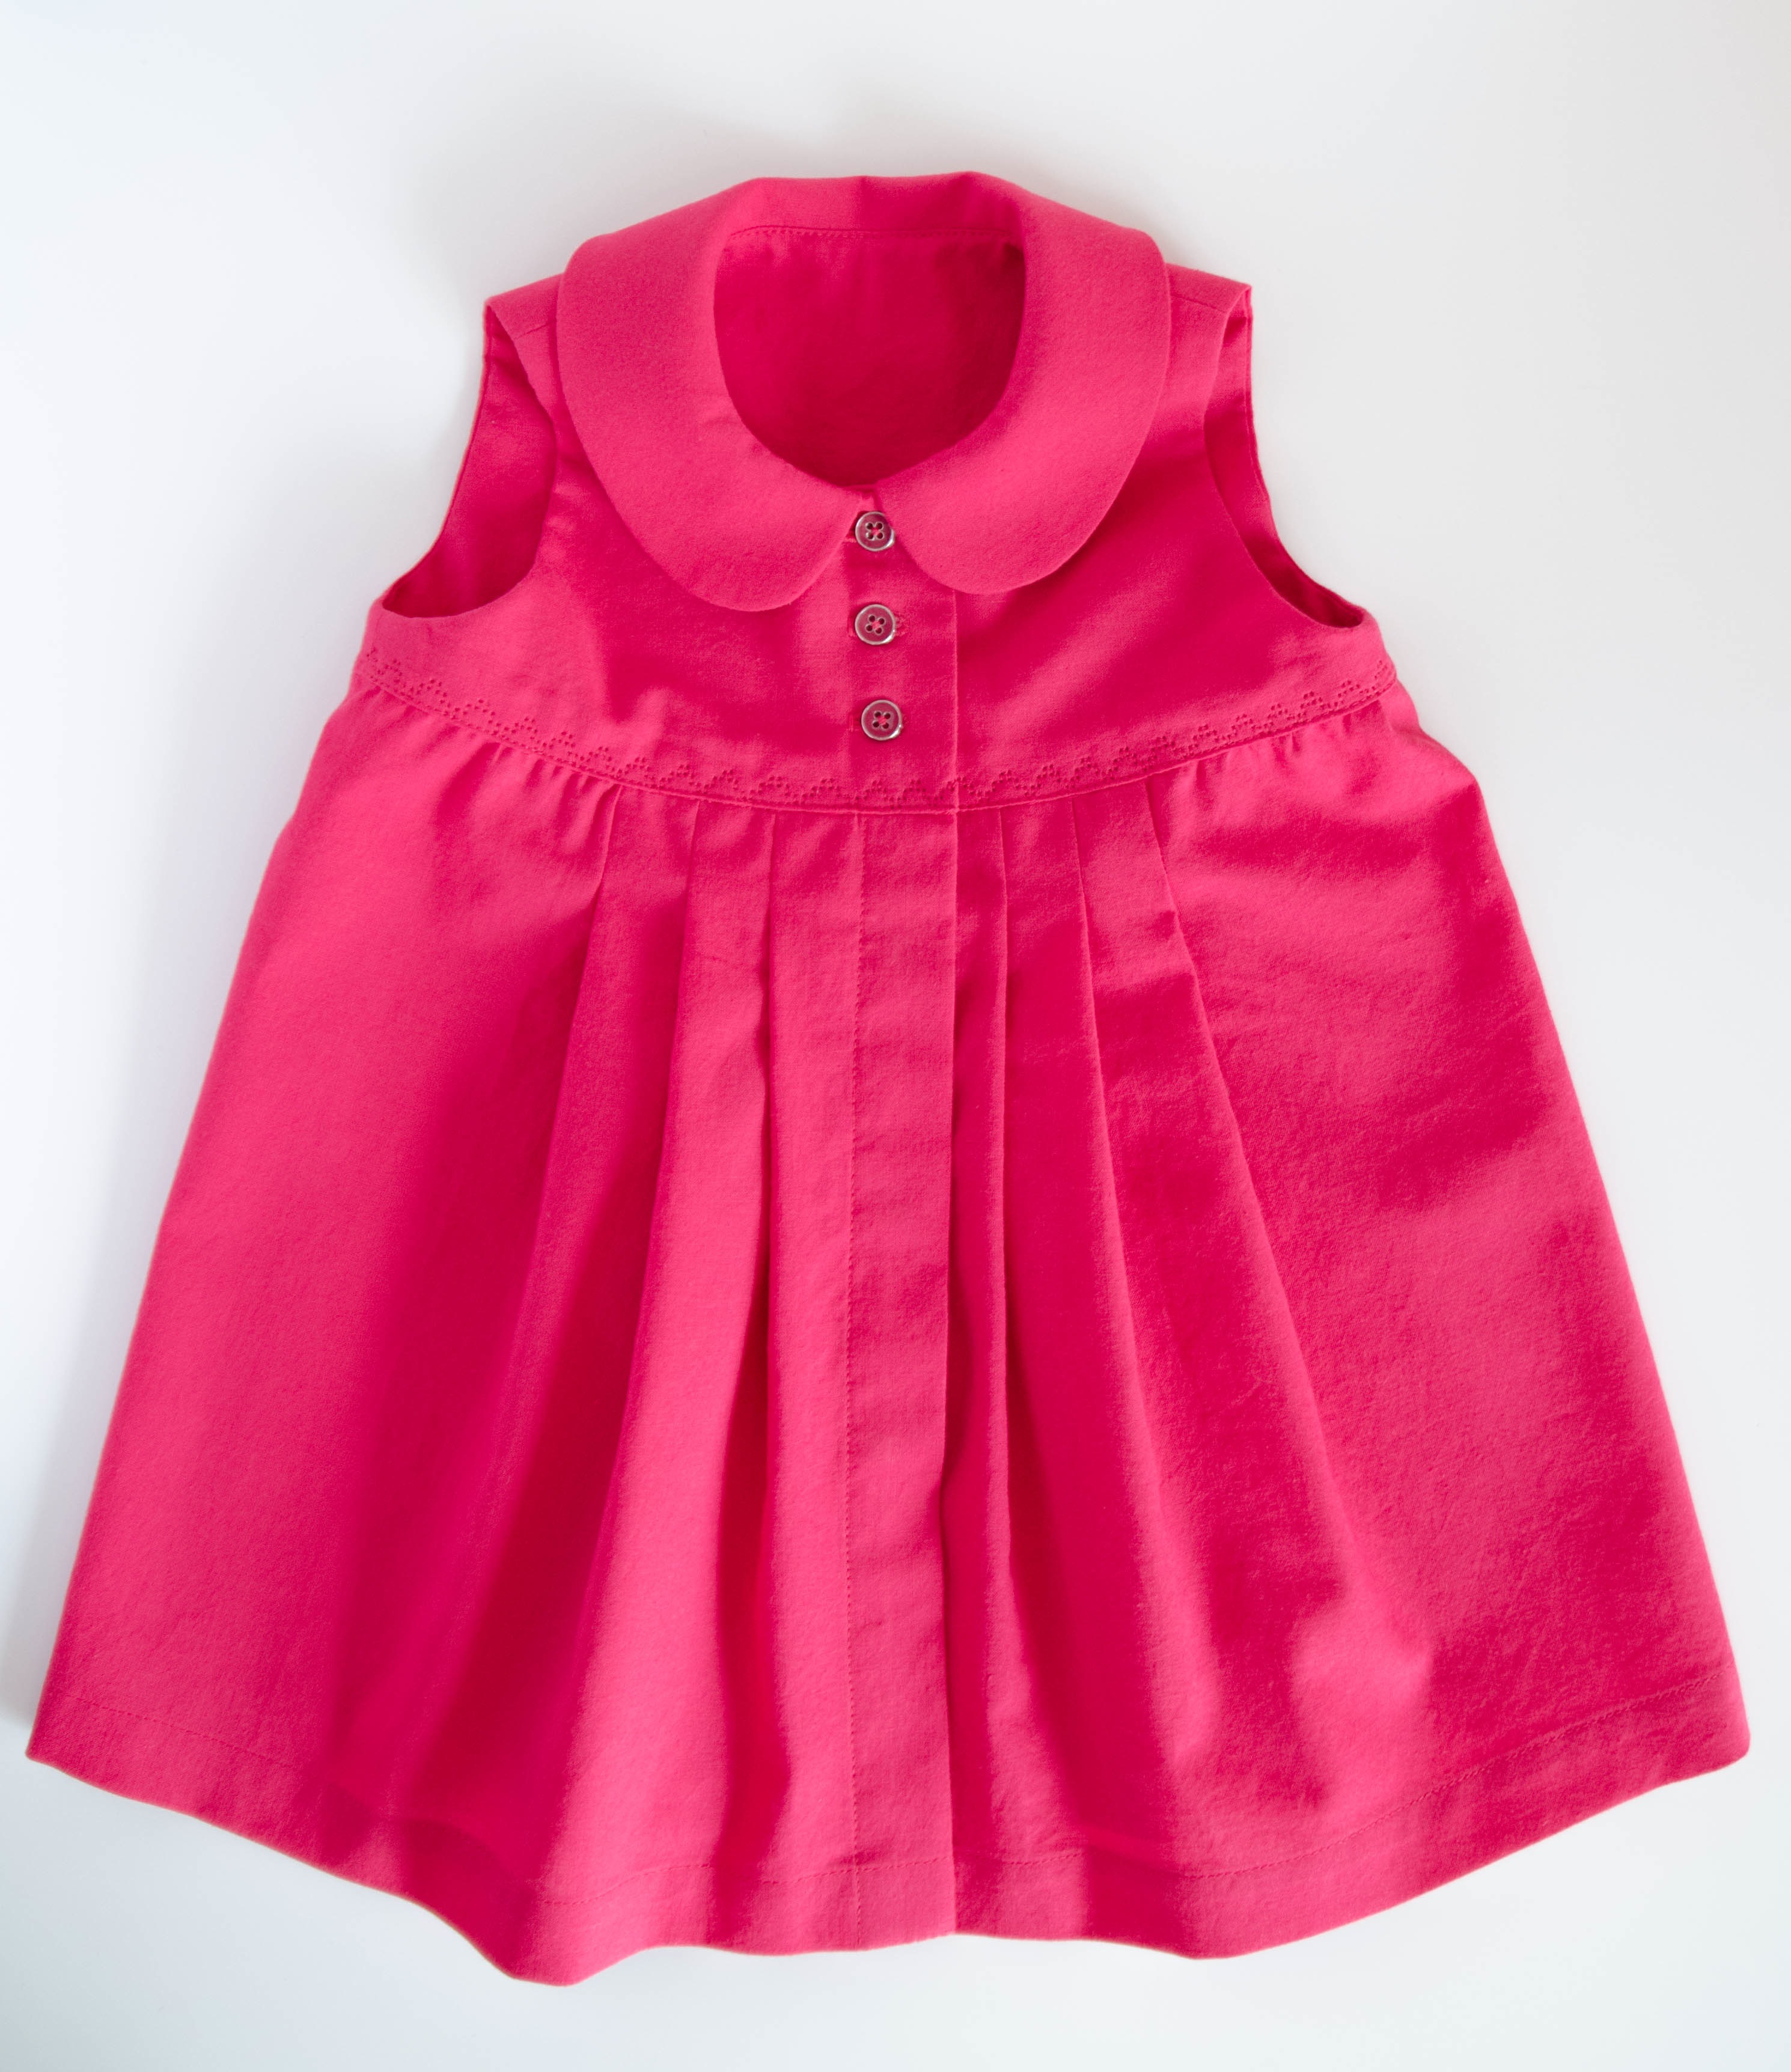 Raspberry Baby Dress – Sewing Projects | BurdaStyle.com